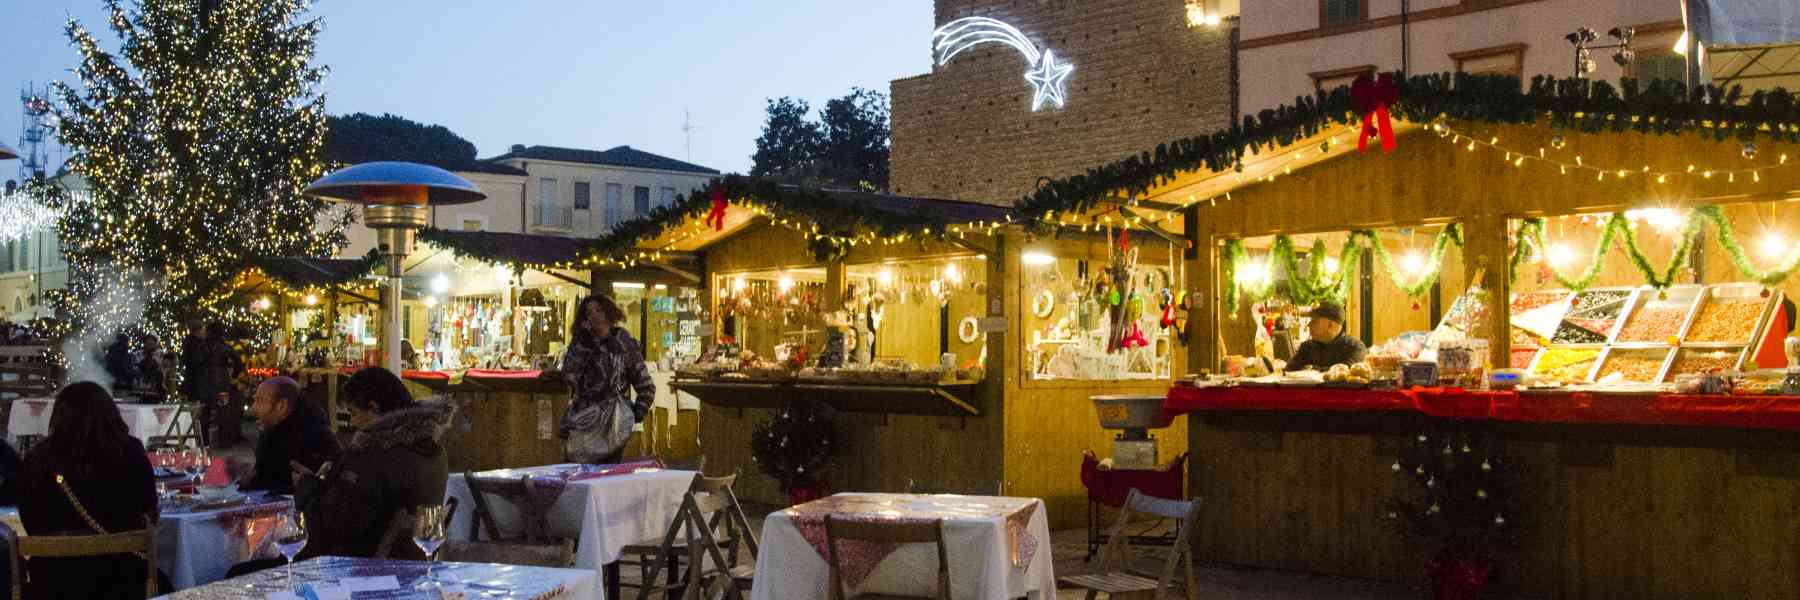 The Christmas village in the centre of Cervia